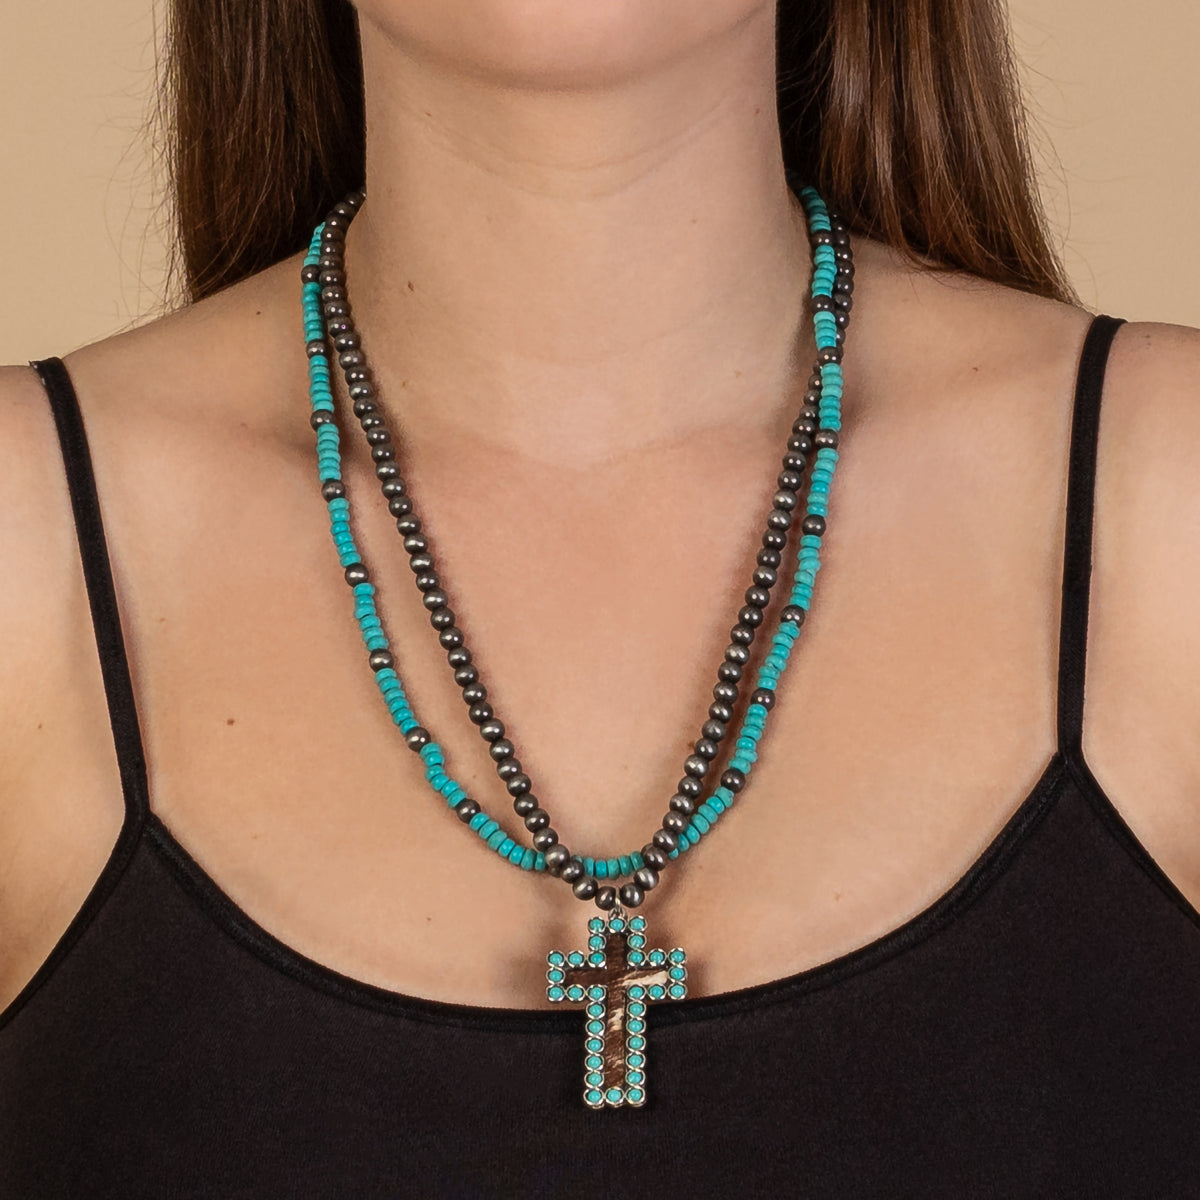 72862 - Animal Print Cross Necklace - Turquoise & Silver